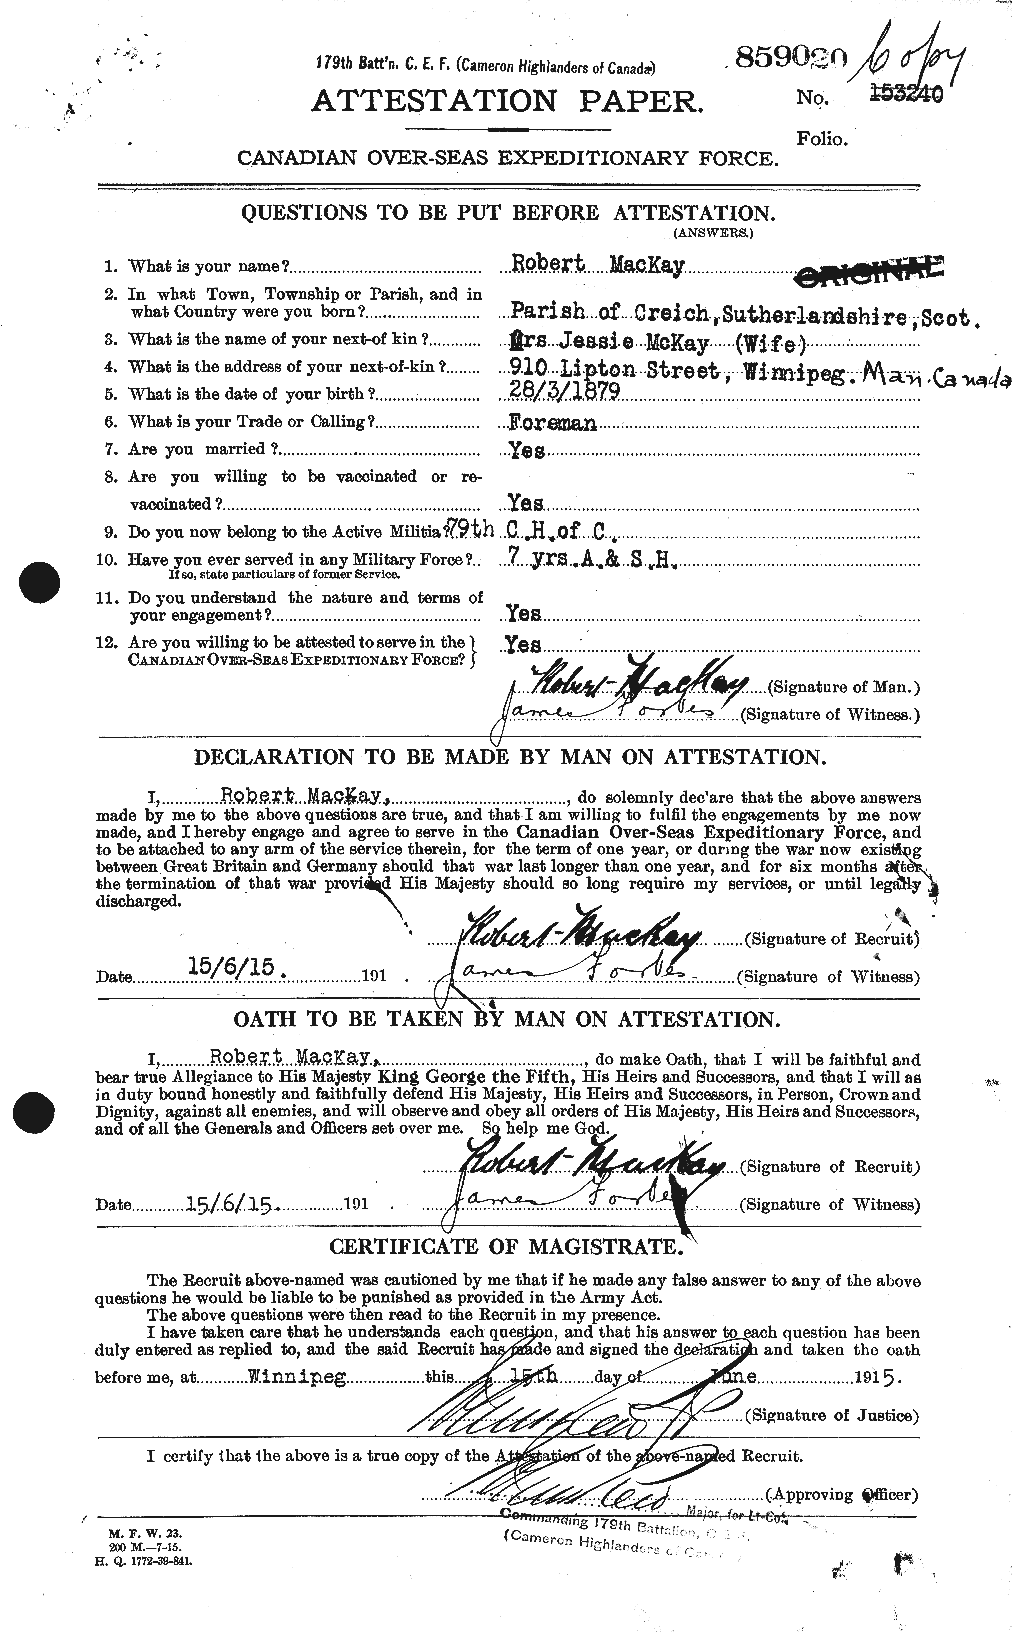 Personnel Records of the First World War - CEF 530070a